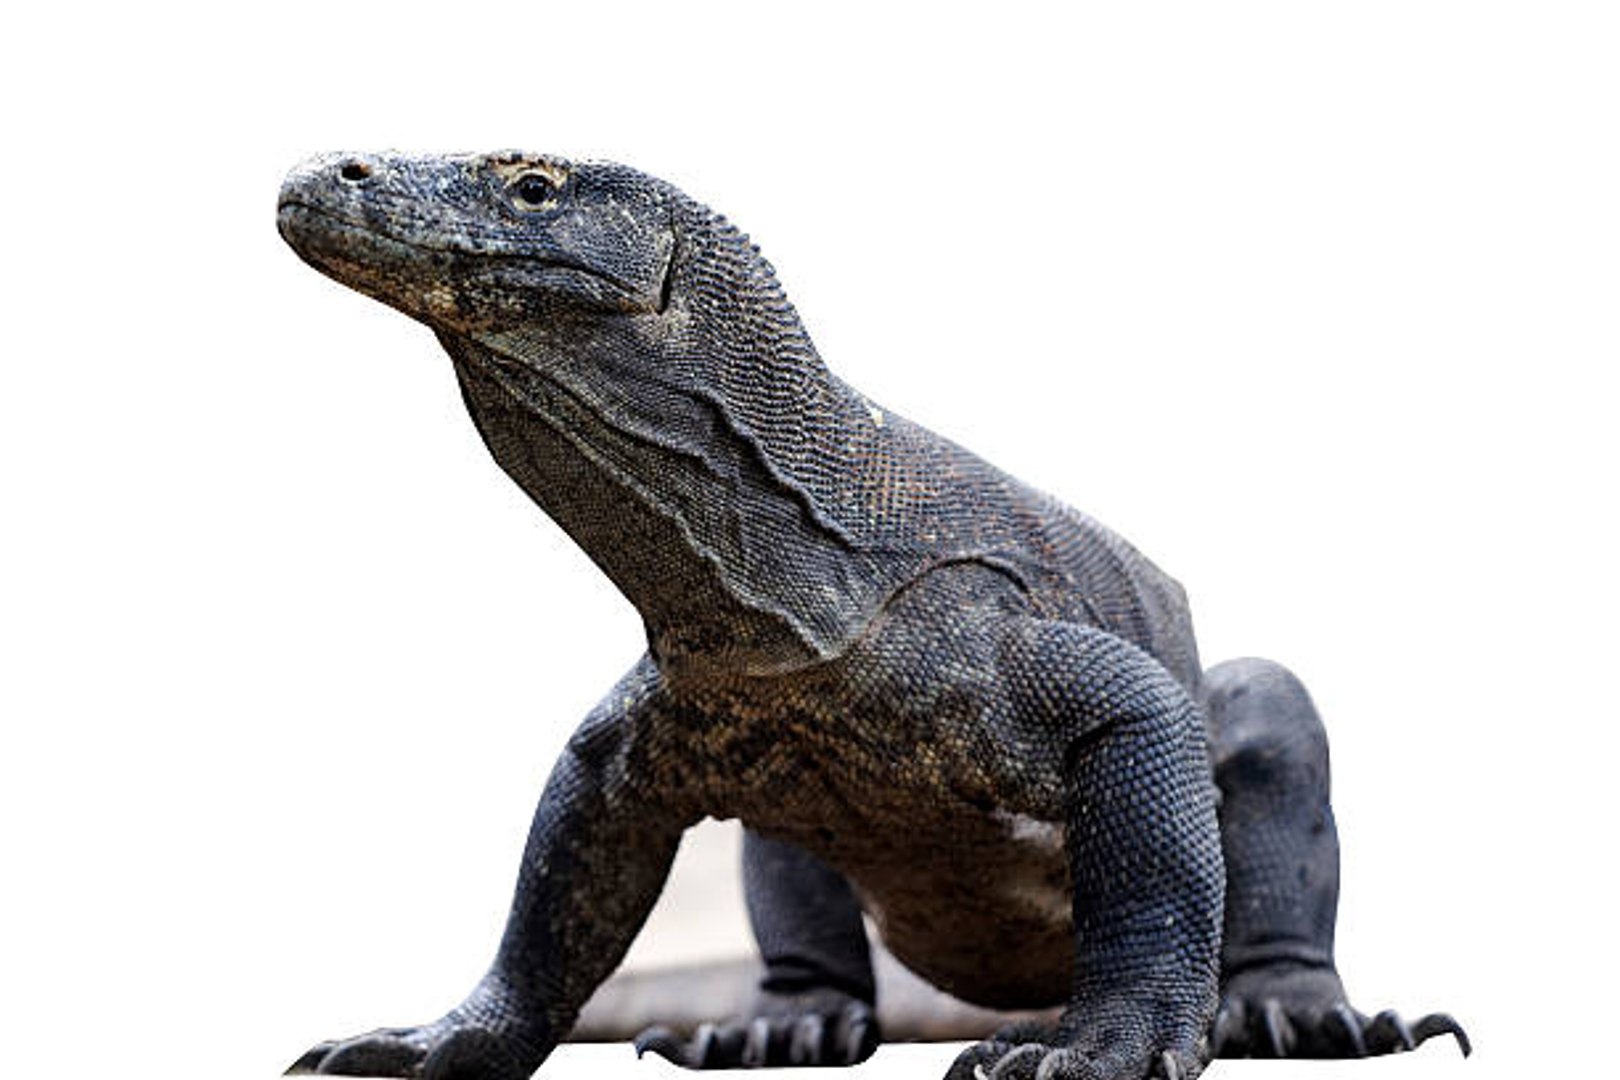 Top 10 Most Popular Reptiles in the World (National Reptile Day)